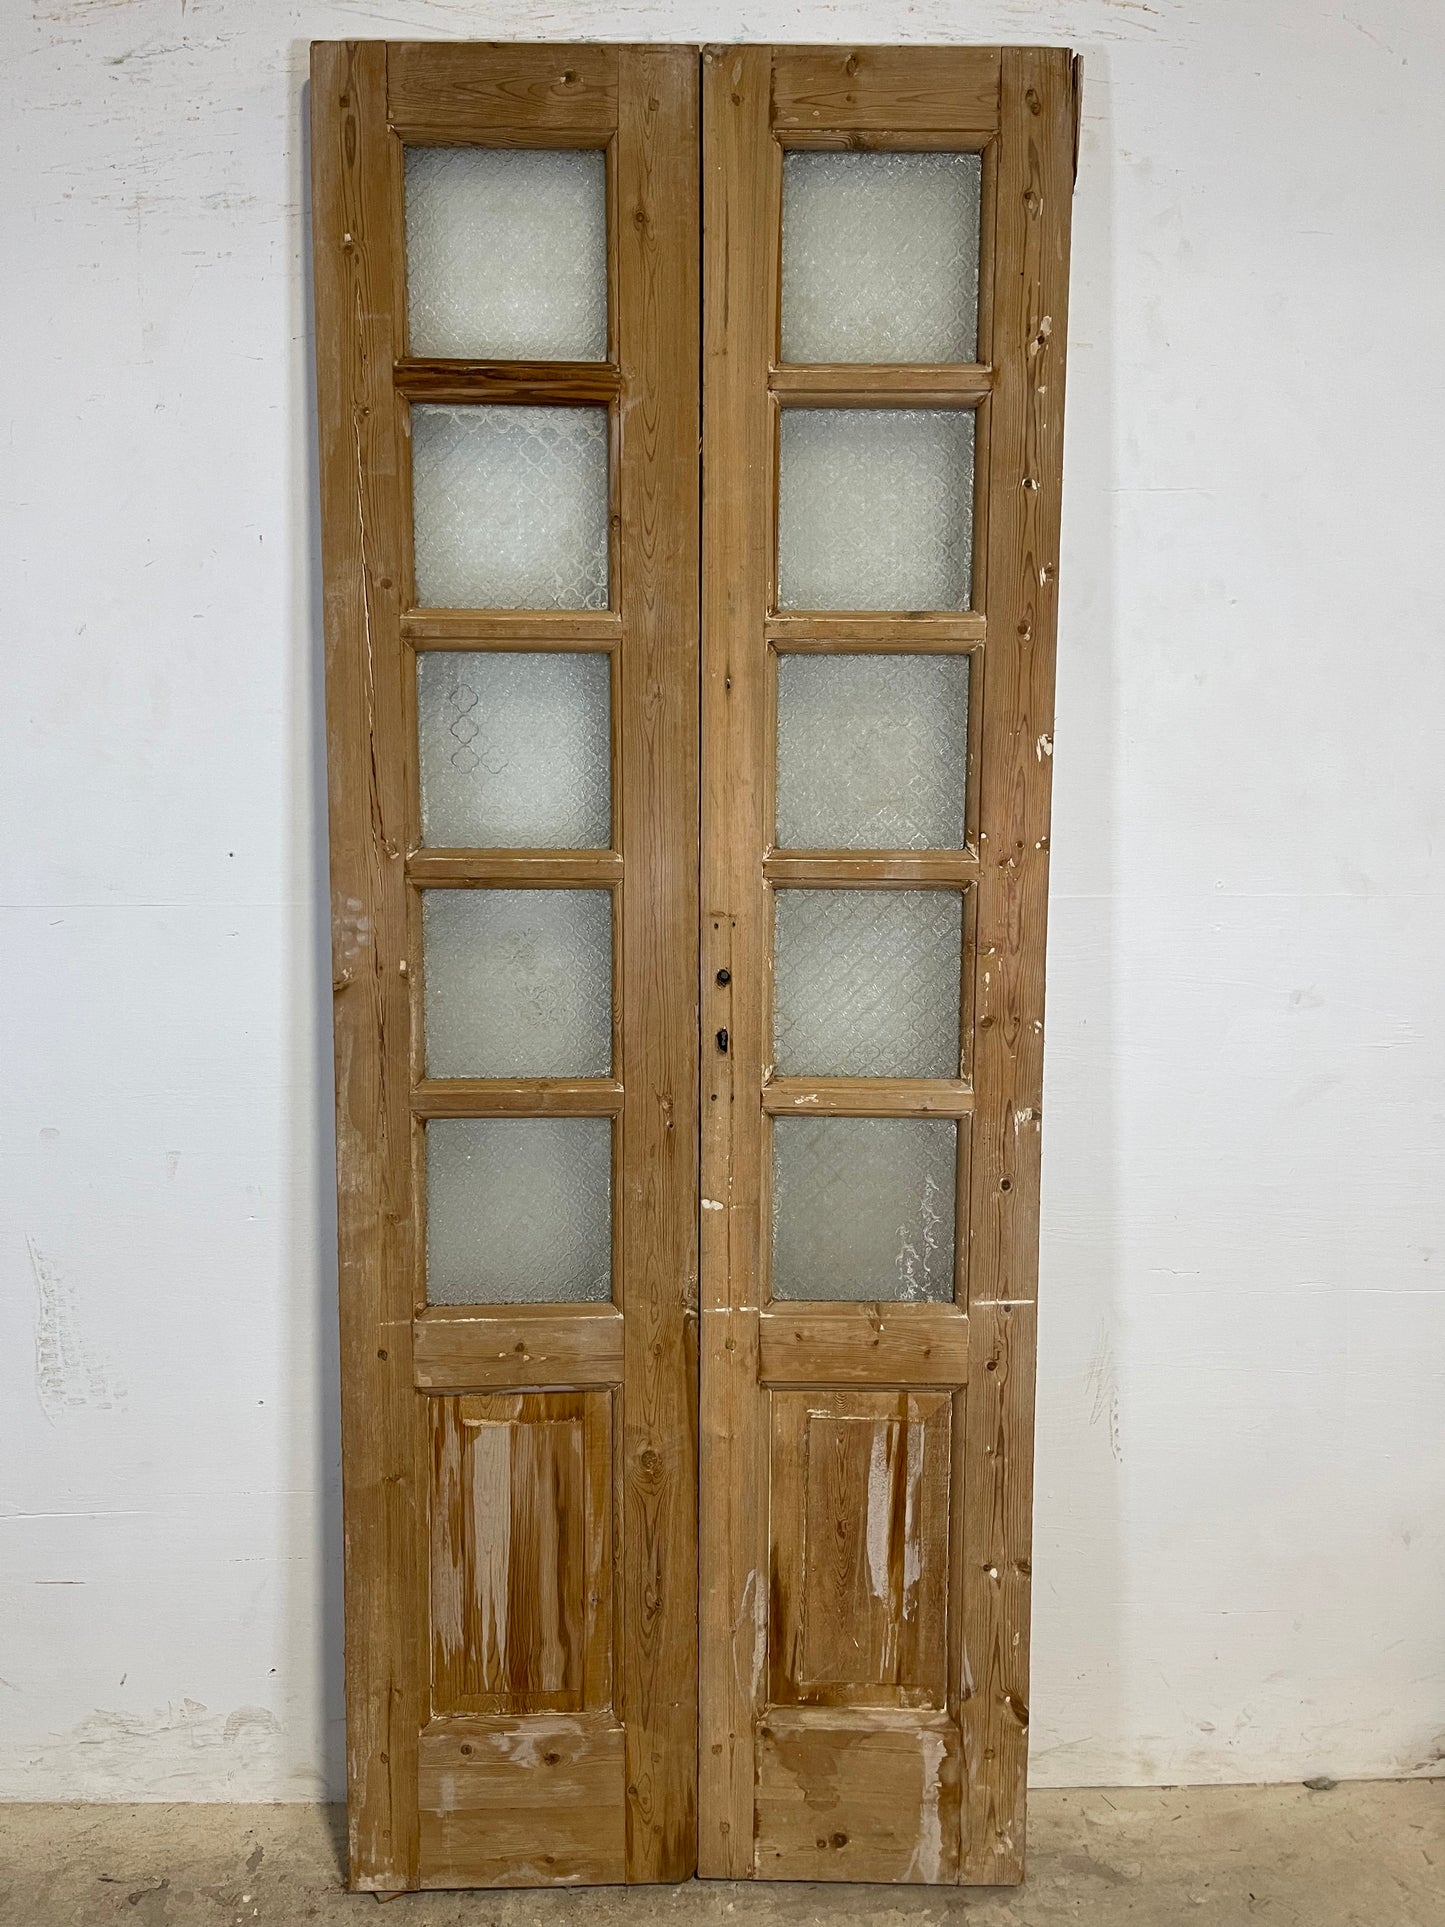 Antique French panel doors with glass (85.5x33.25) K331